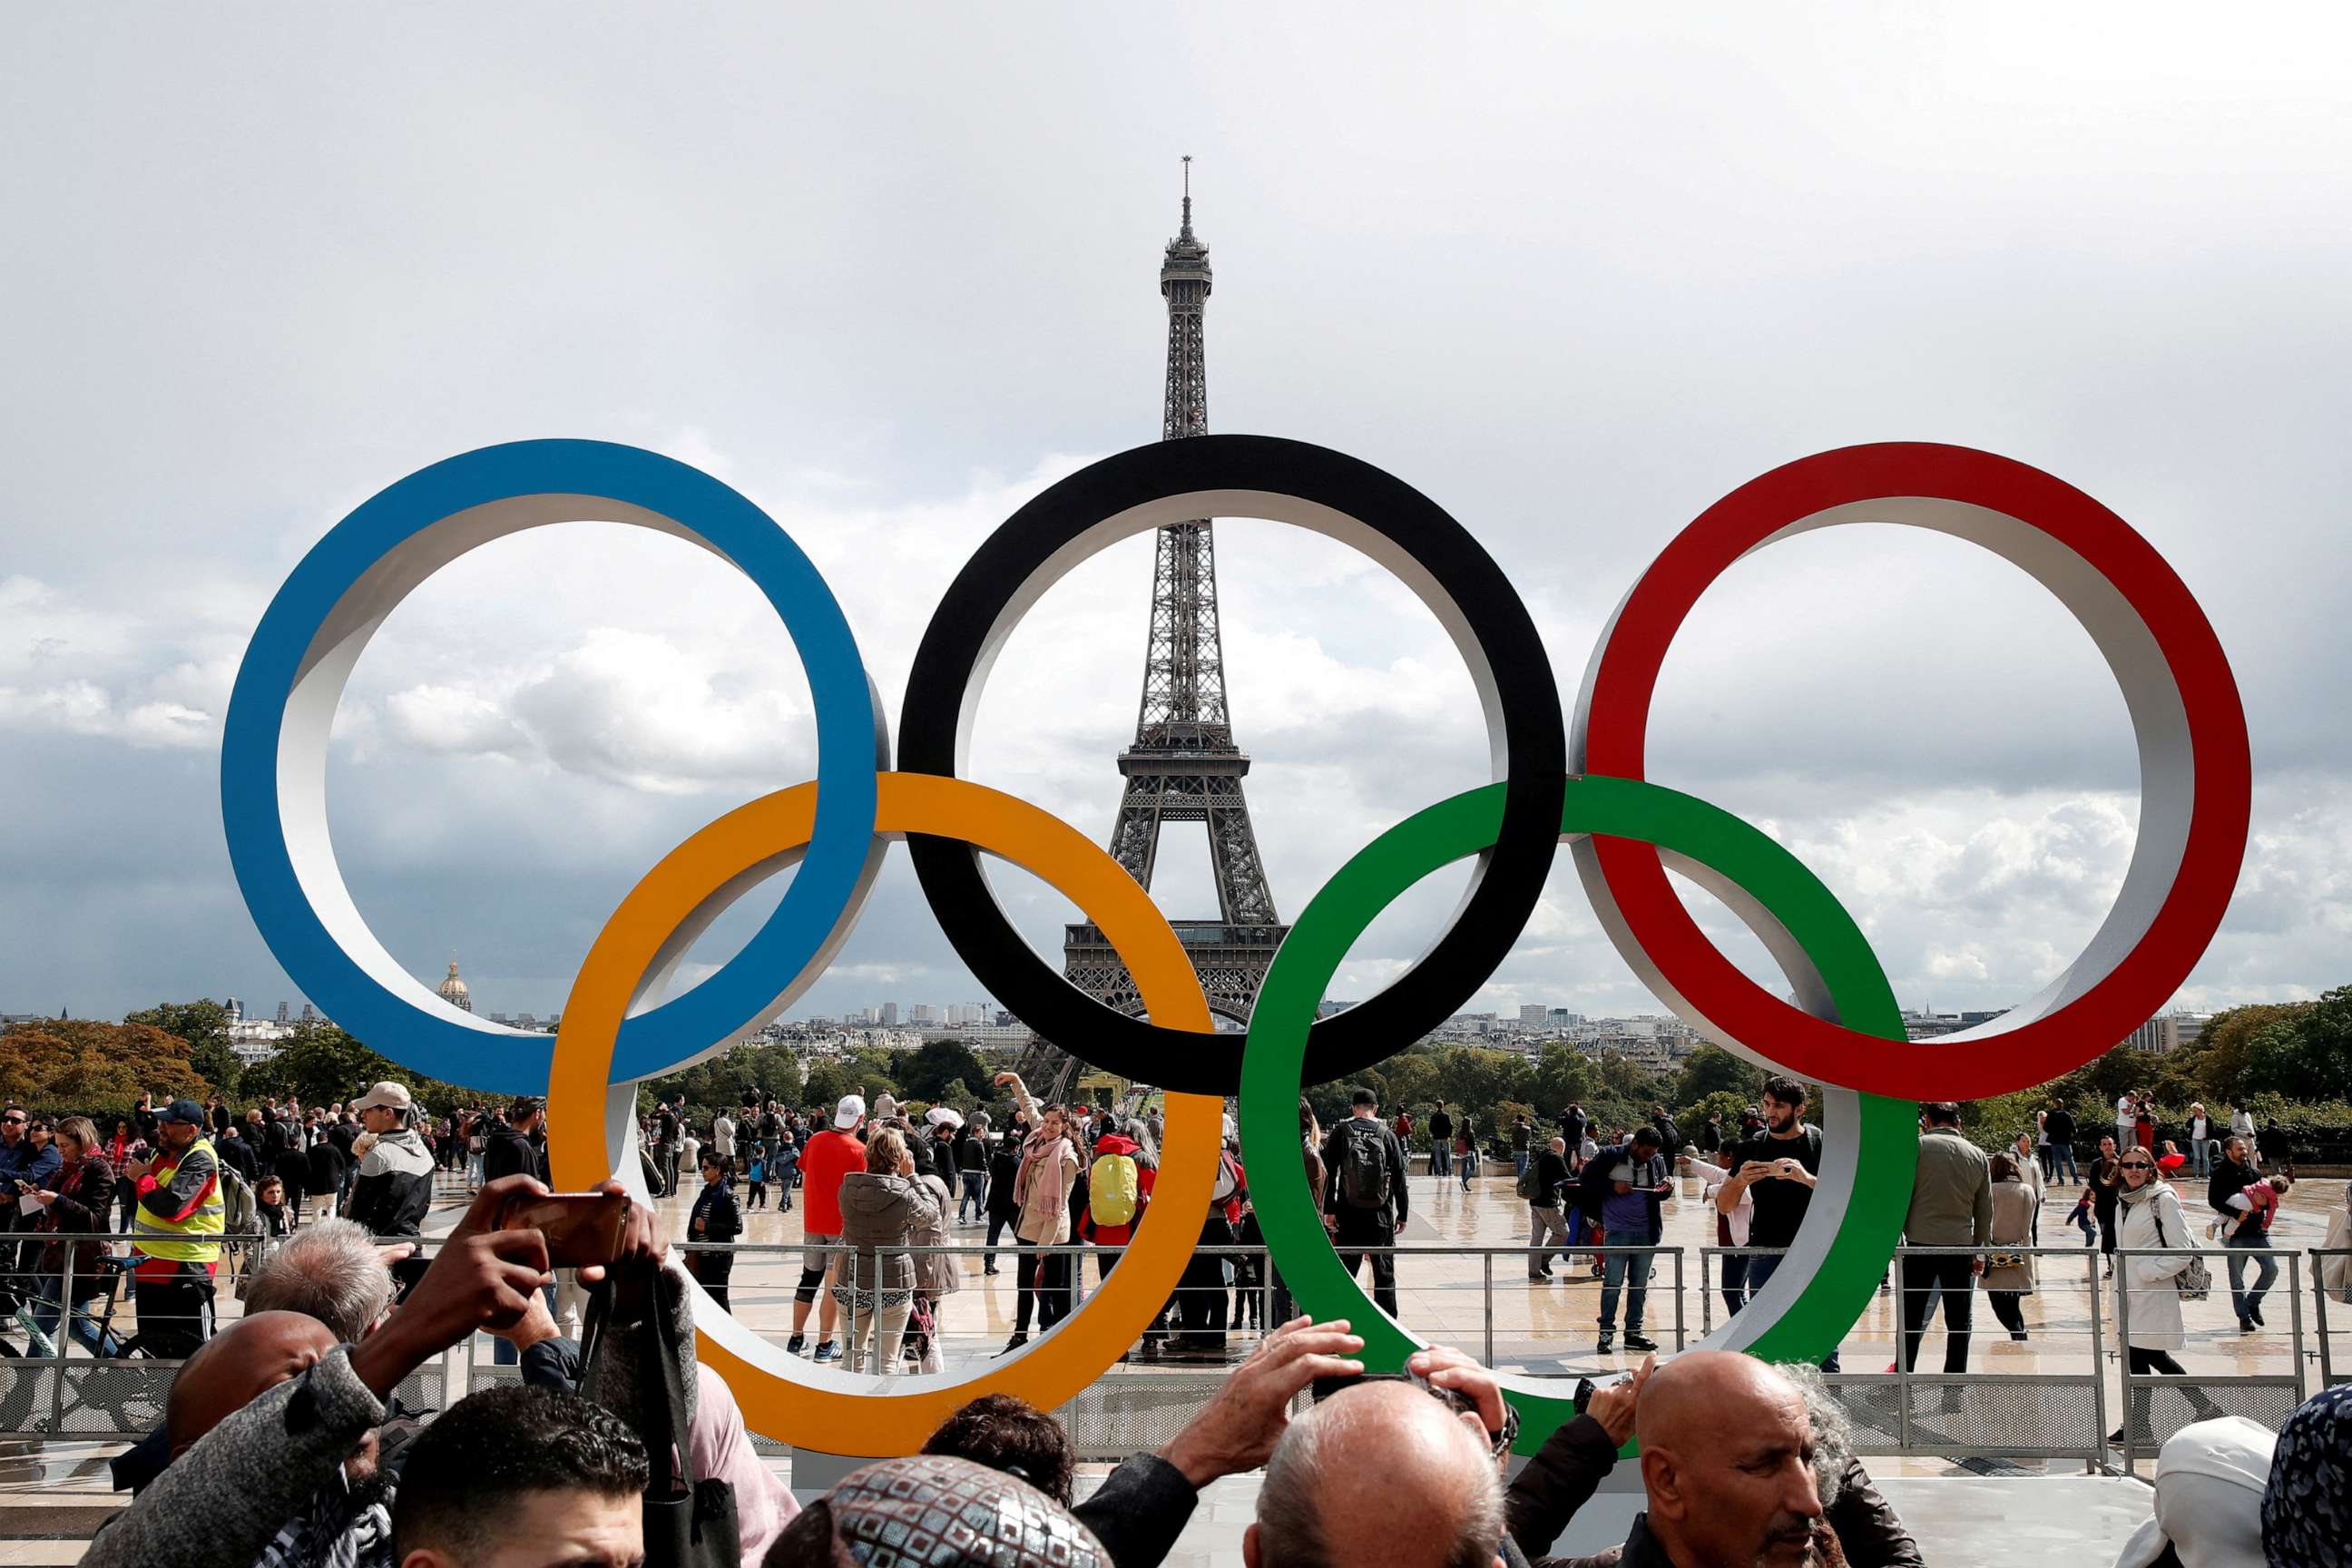 PHOTO: In this file photo, Olympic rings to celebrate the IOC official announcement that Paris won the 2024 Olympic bid are seen in front of the Eiffel Tower at the Trocadero square in Paris, France, Sep. 16, 2017.